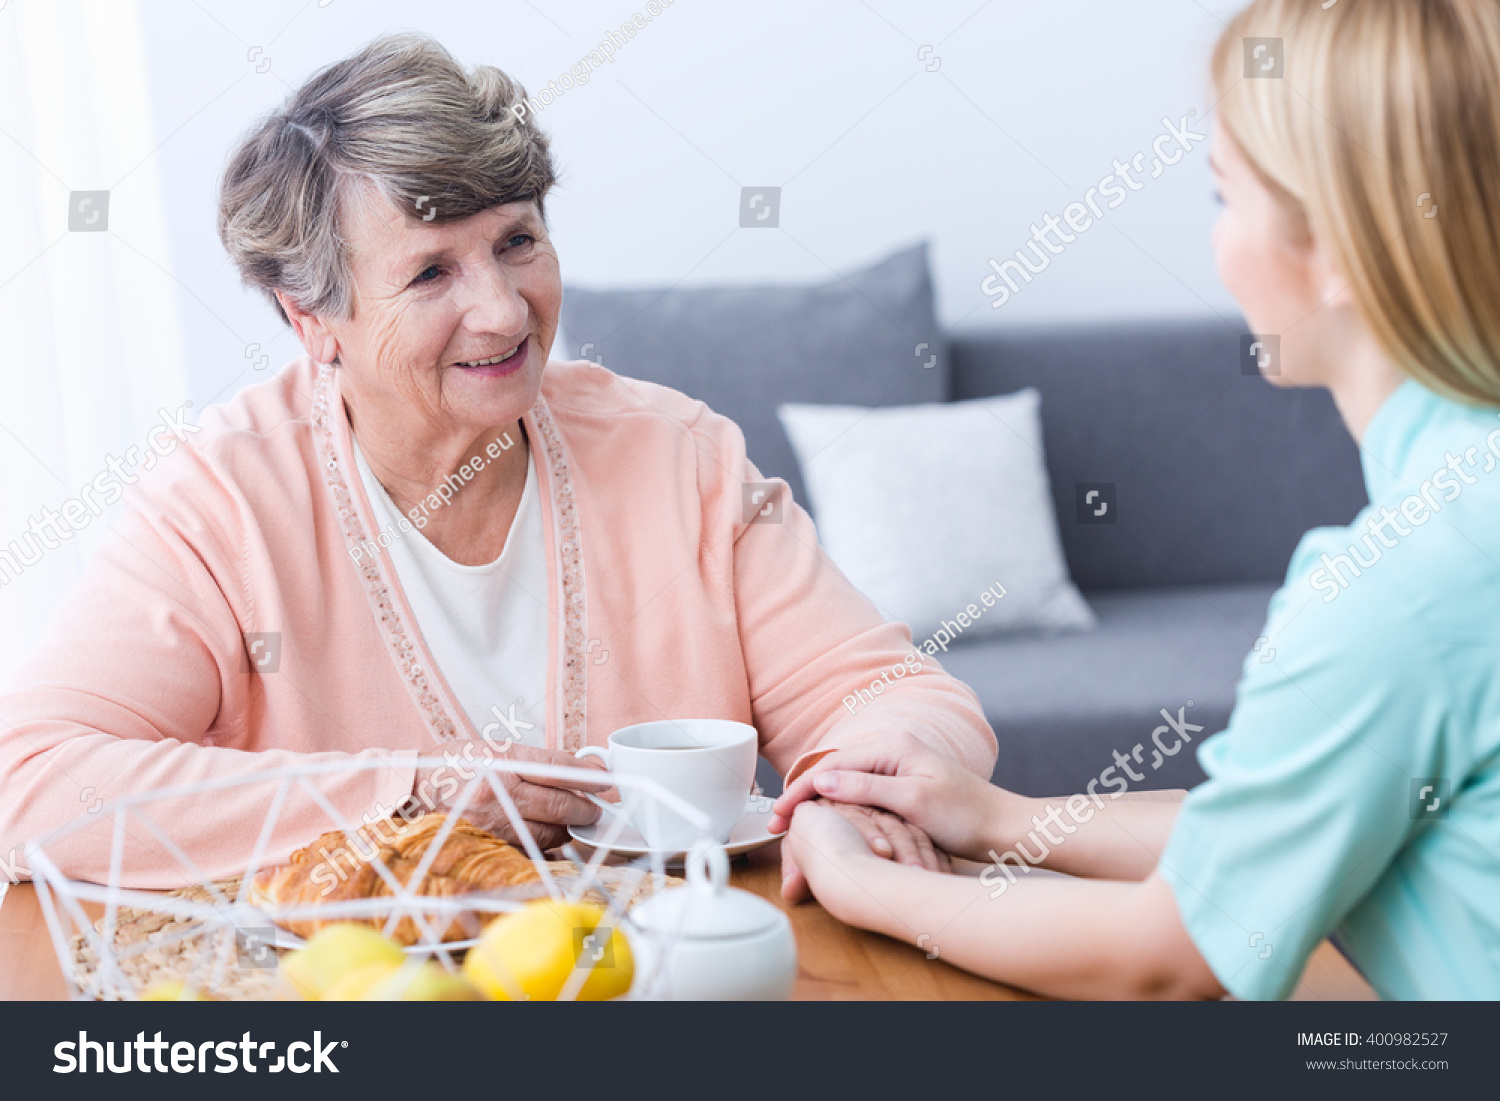 Picture of positive senior with health afflictions and carer #400982527